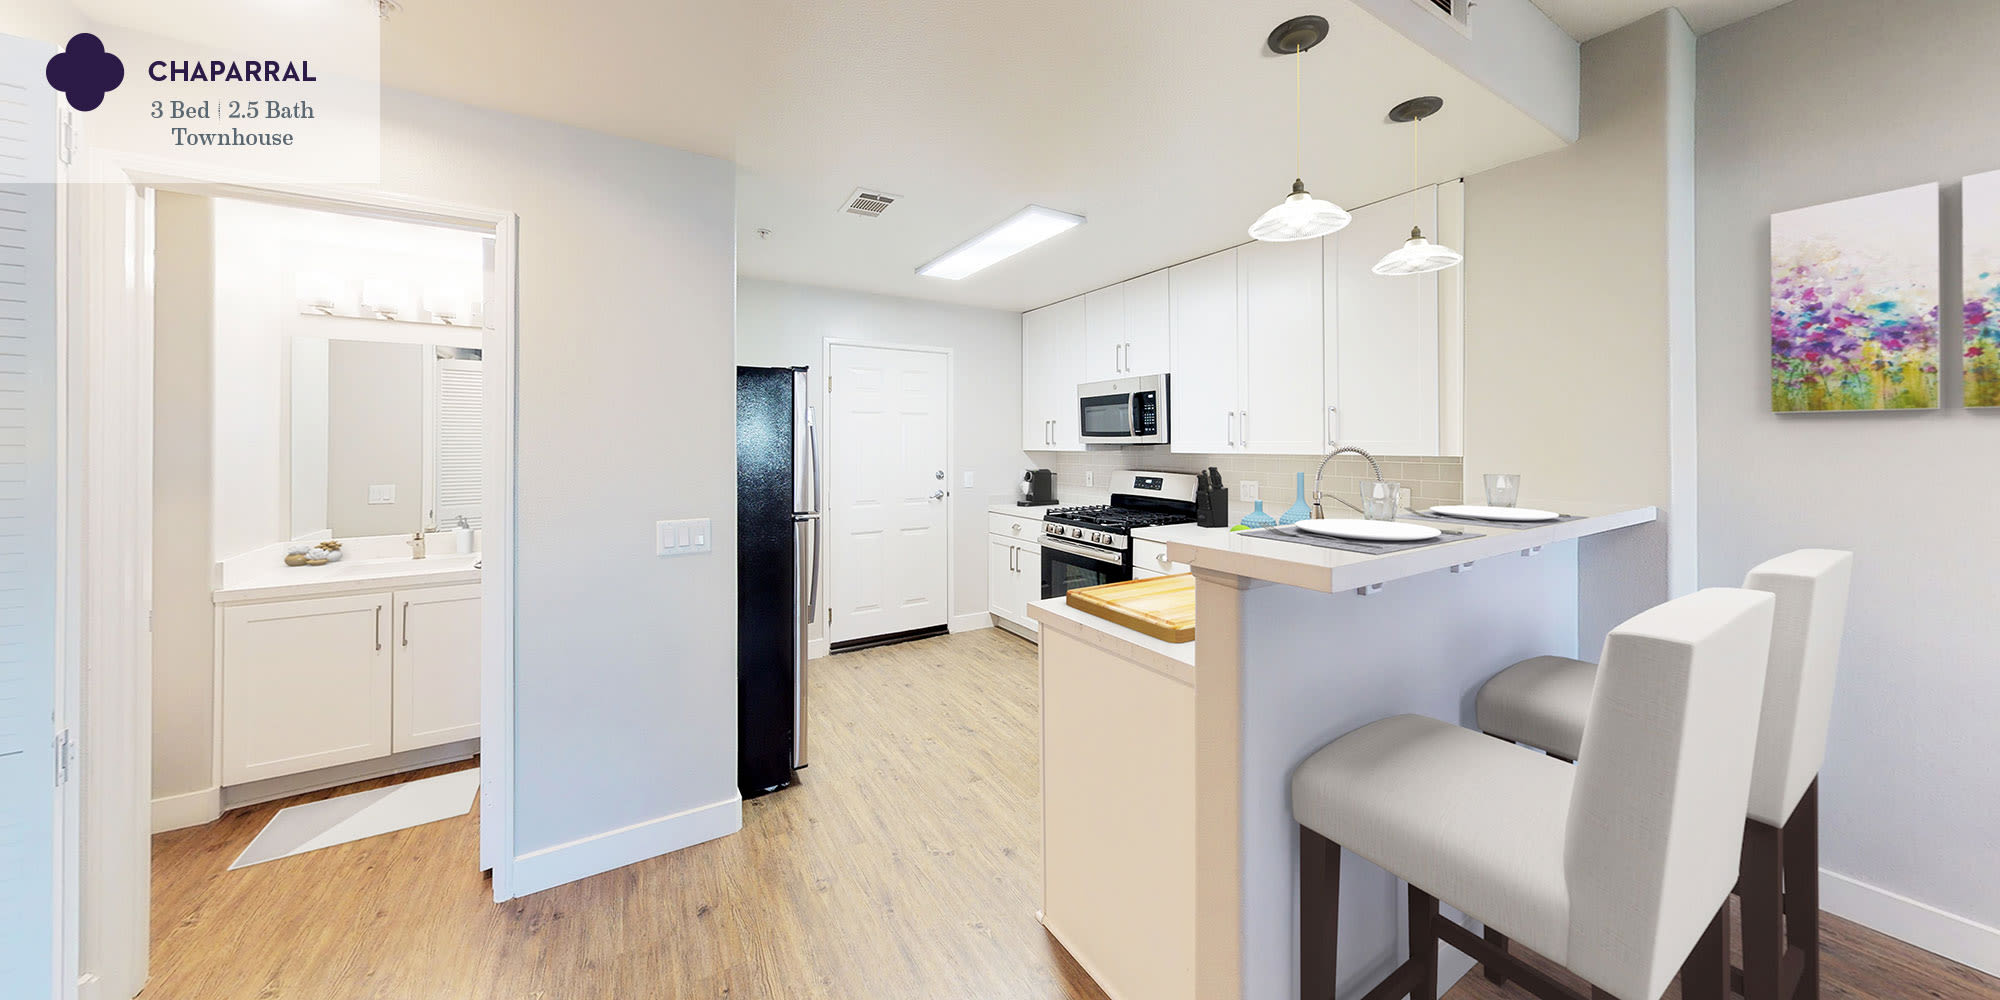 A kitchen in a three-bedroom apartment townhome at Mission Hills in Camarillo, California